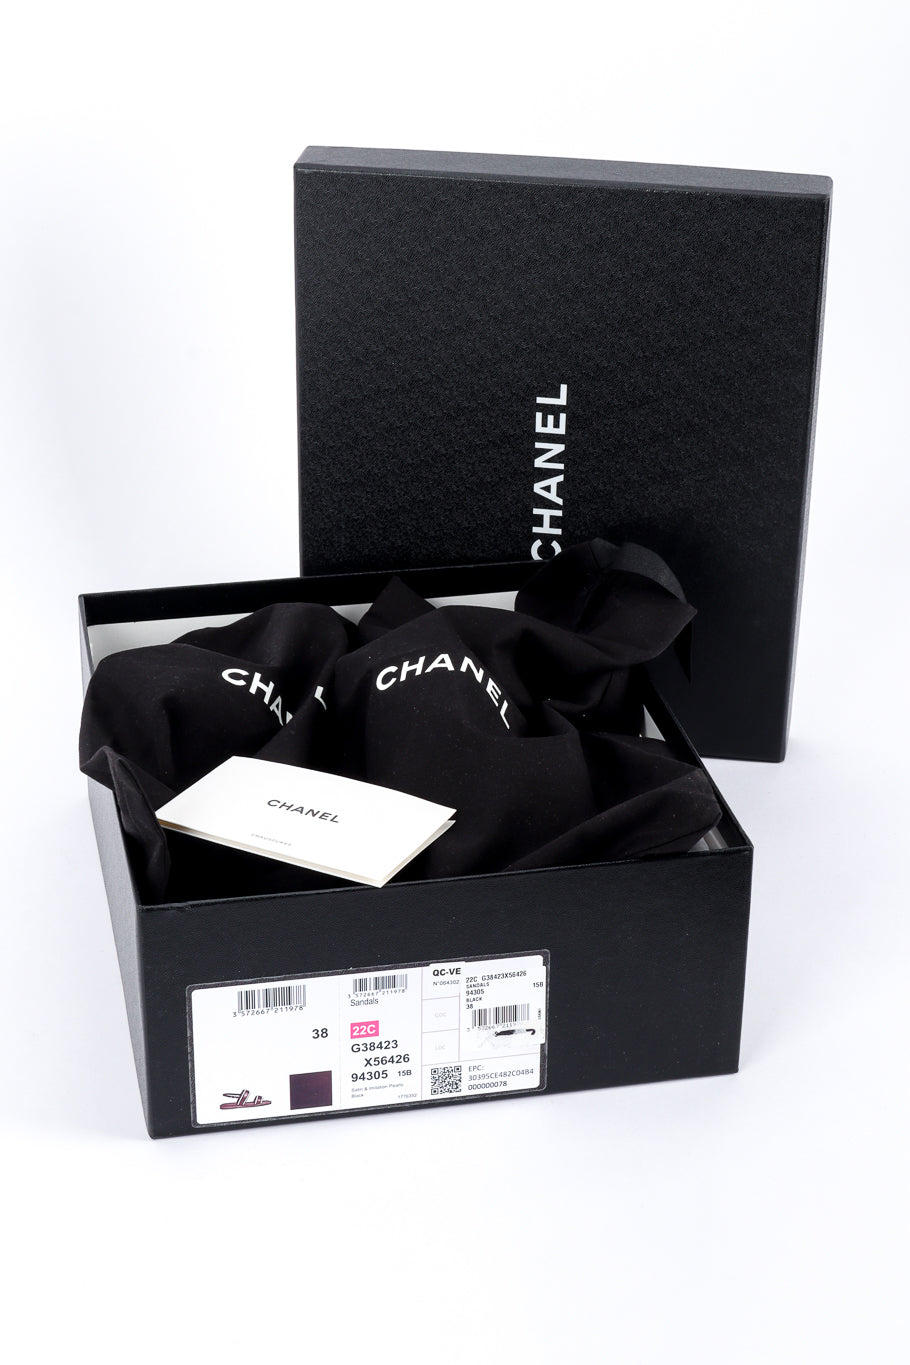 Chanel CC Satin & Pearl Sandals with box and dust bags @recess la